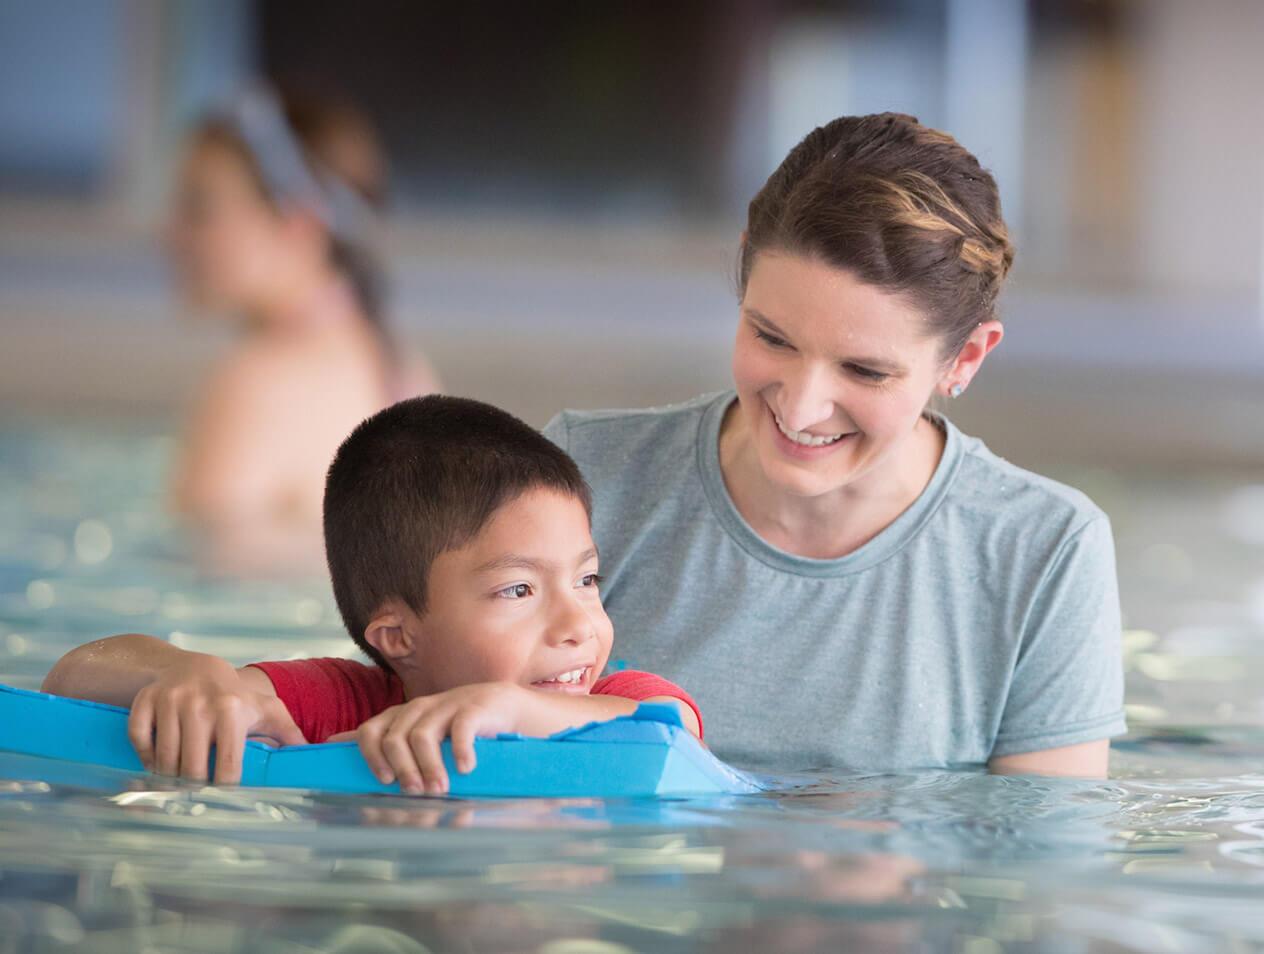 A physical therapist guides a young boy on a flotation device during aquatic exercises